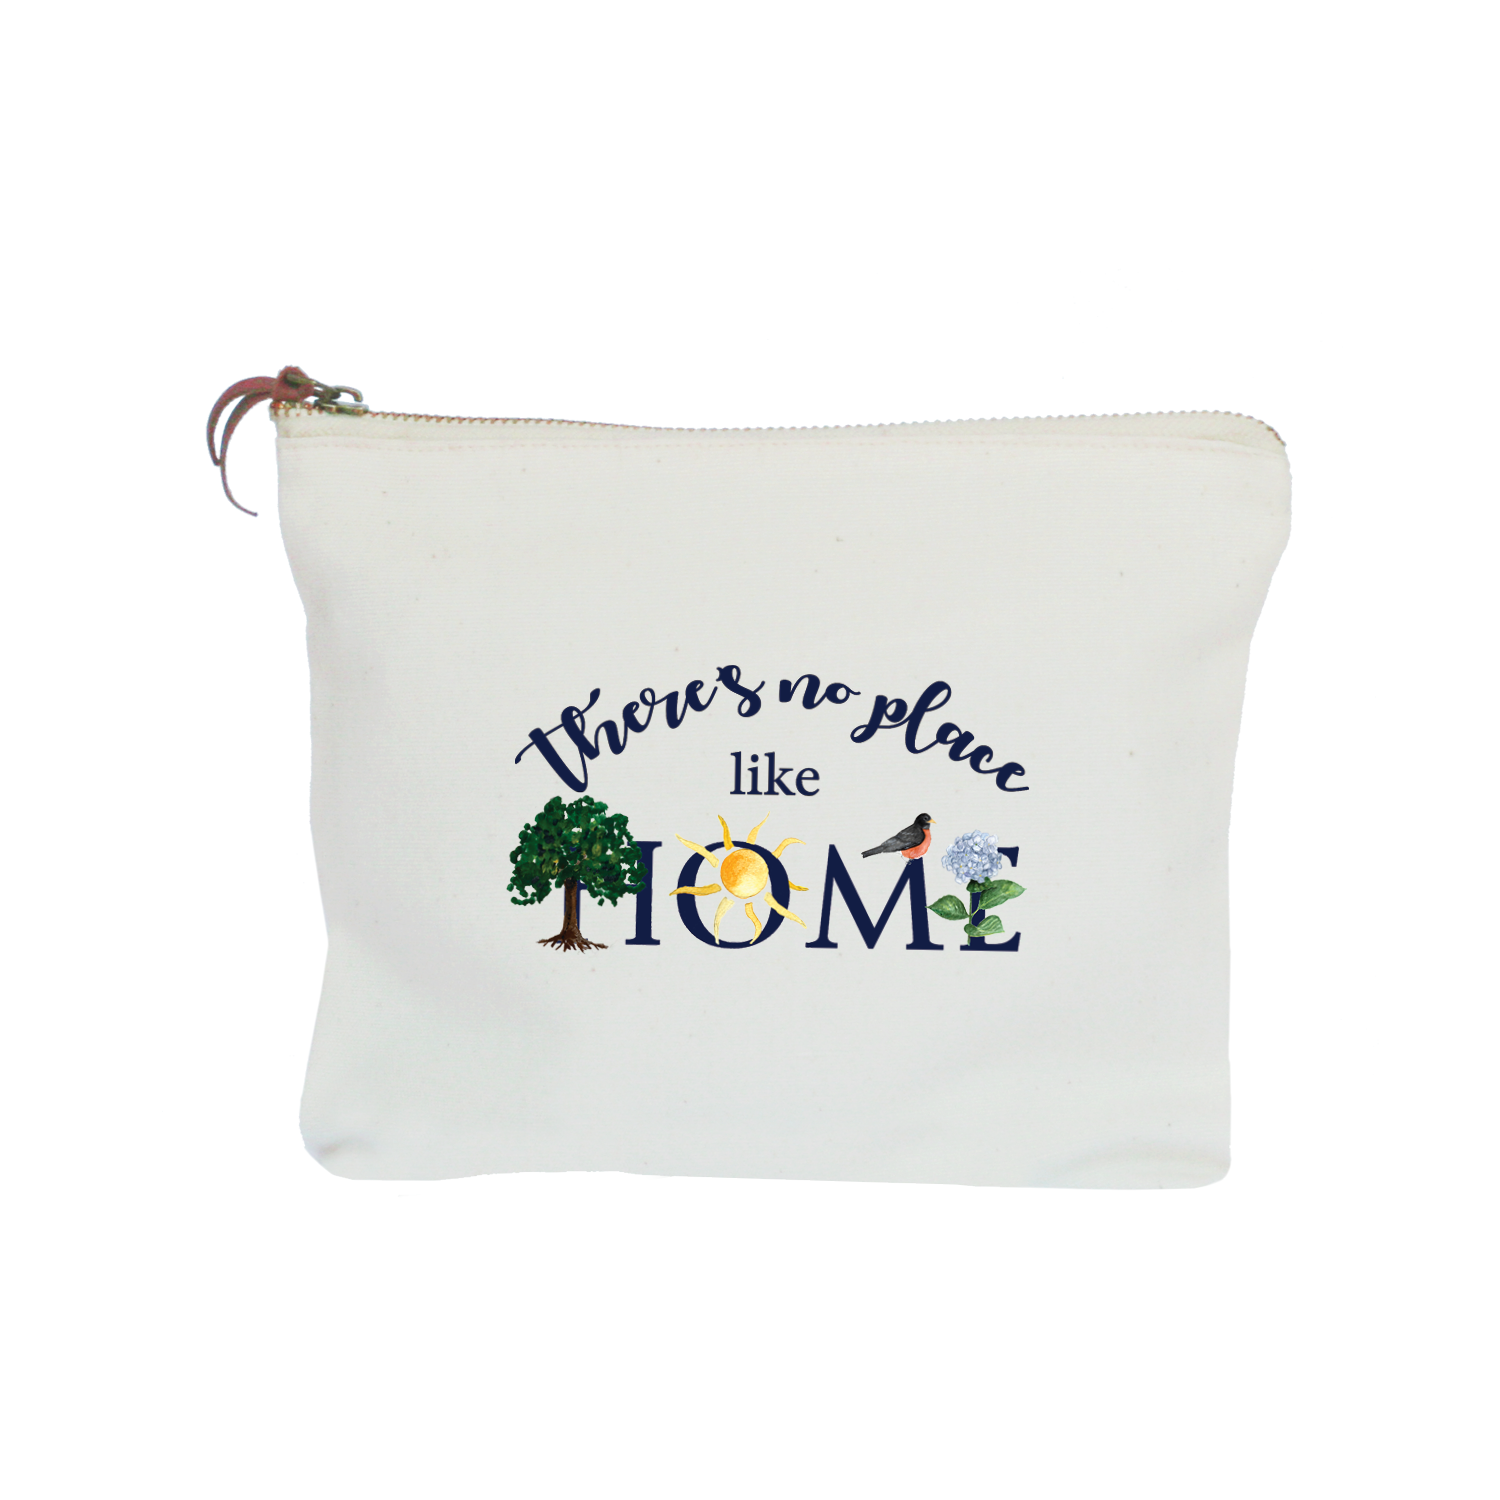 no place like home summer zipper pouch